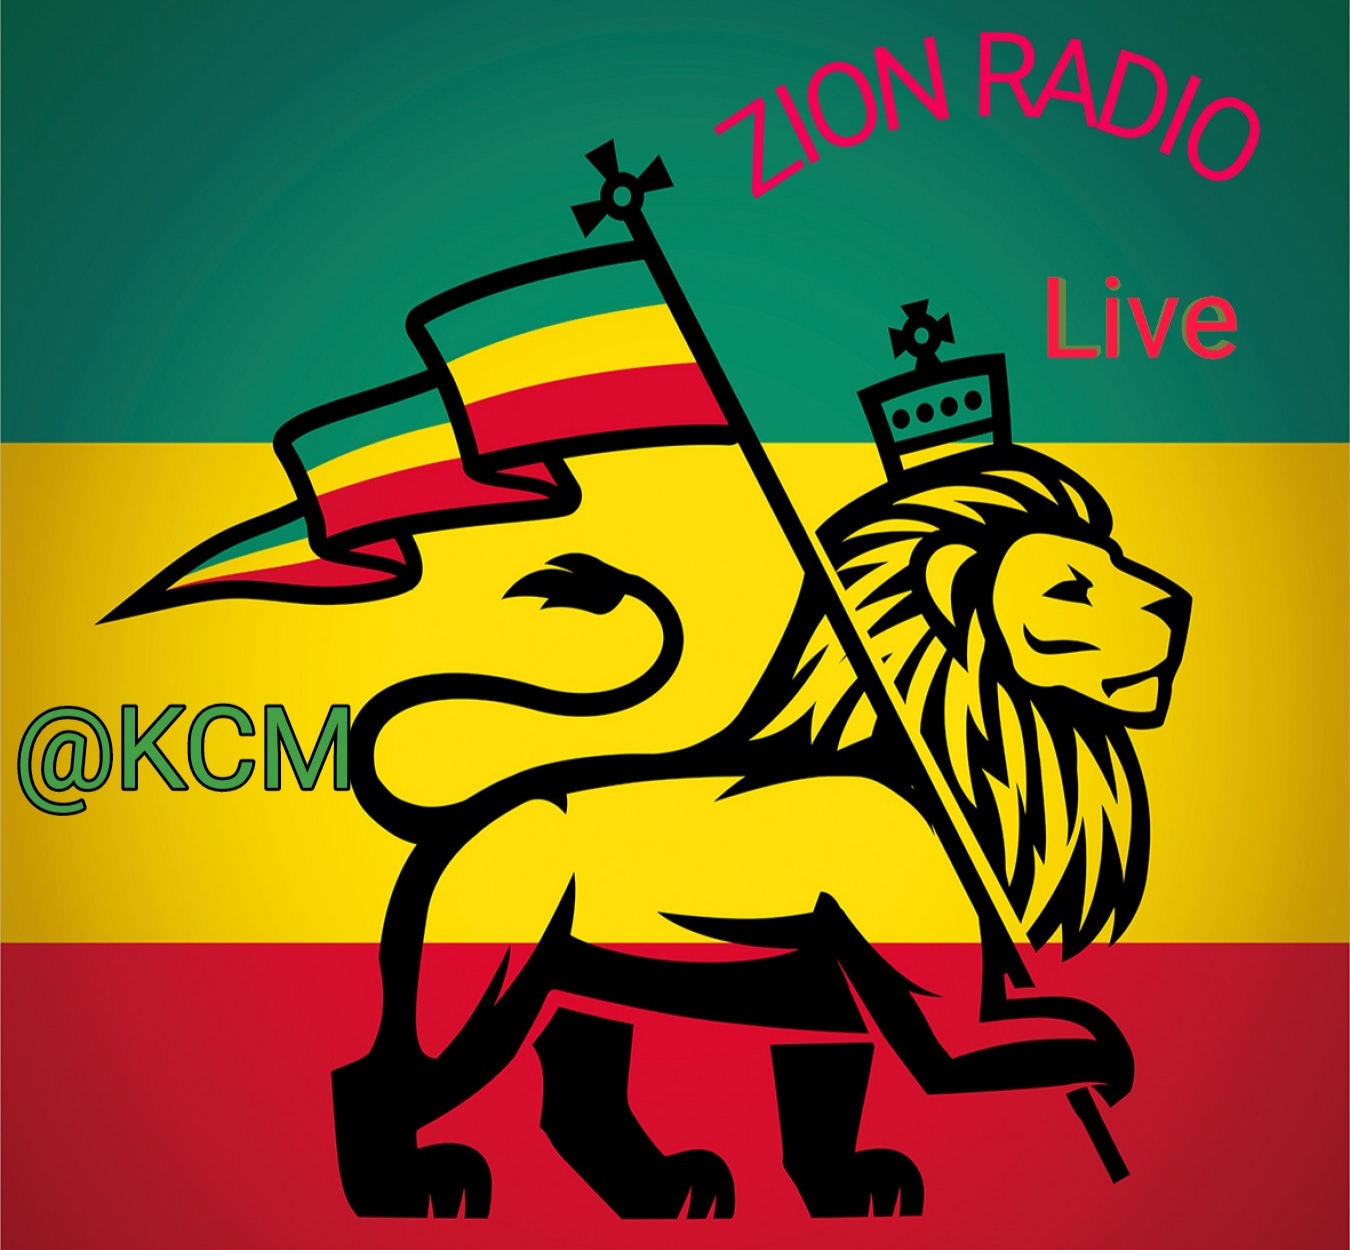 Read more about the article Zion Radio Show: Live session at KCM